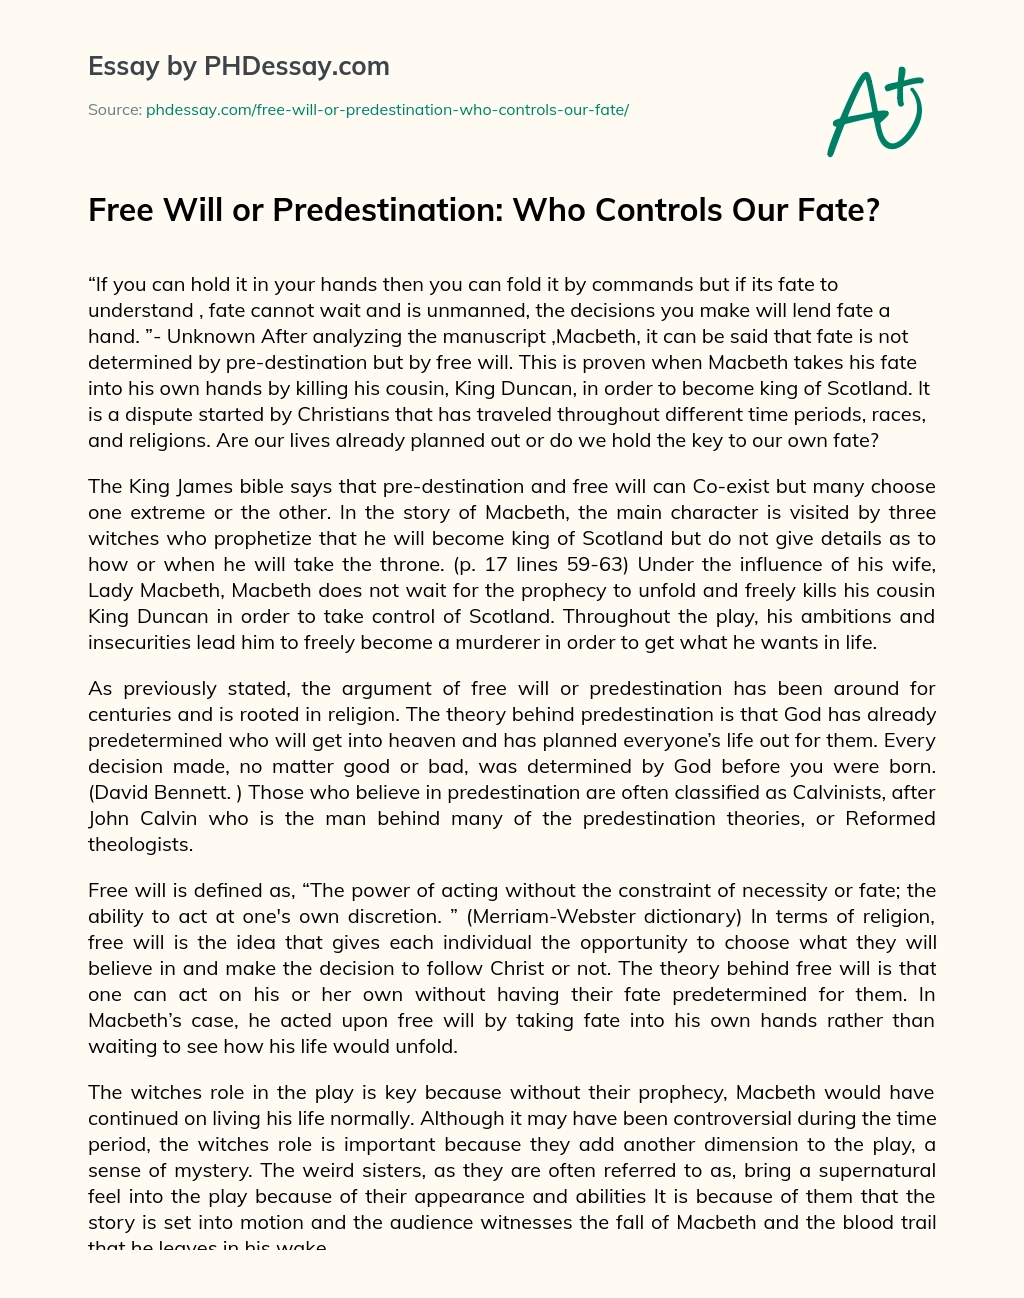 Free Will or Predestination: Who Controls Our Fate? essay